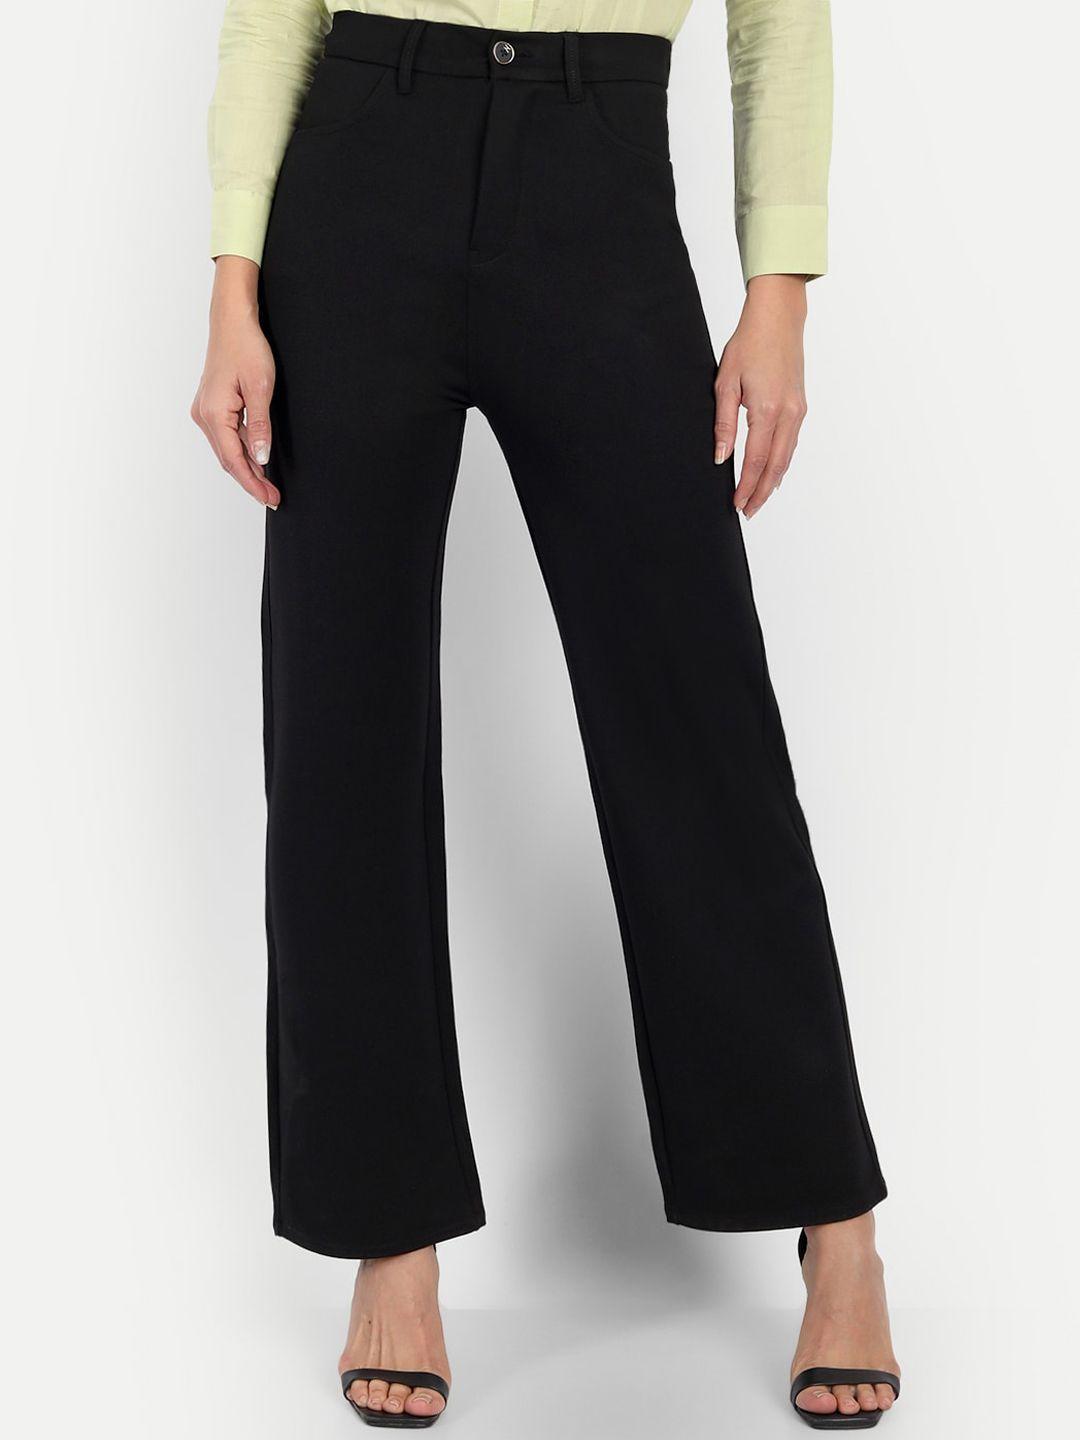 Next One Women Black Straight Fit High-Rise Easy Wash Trousers